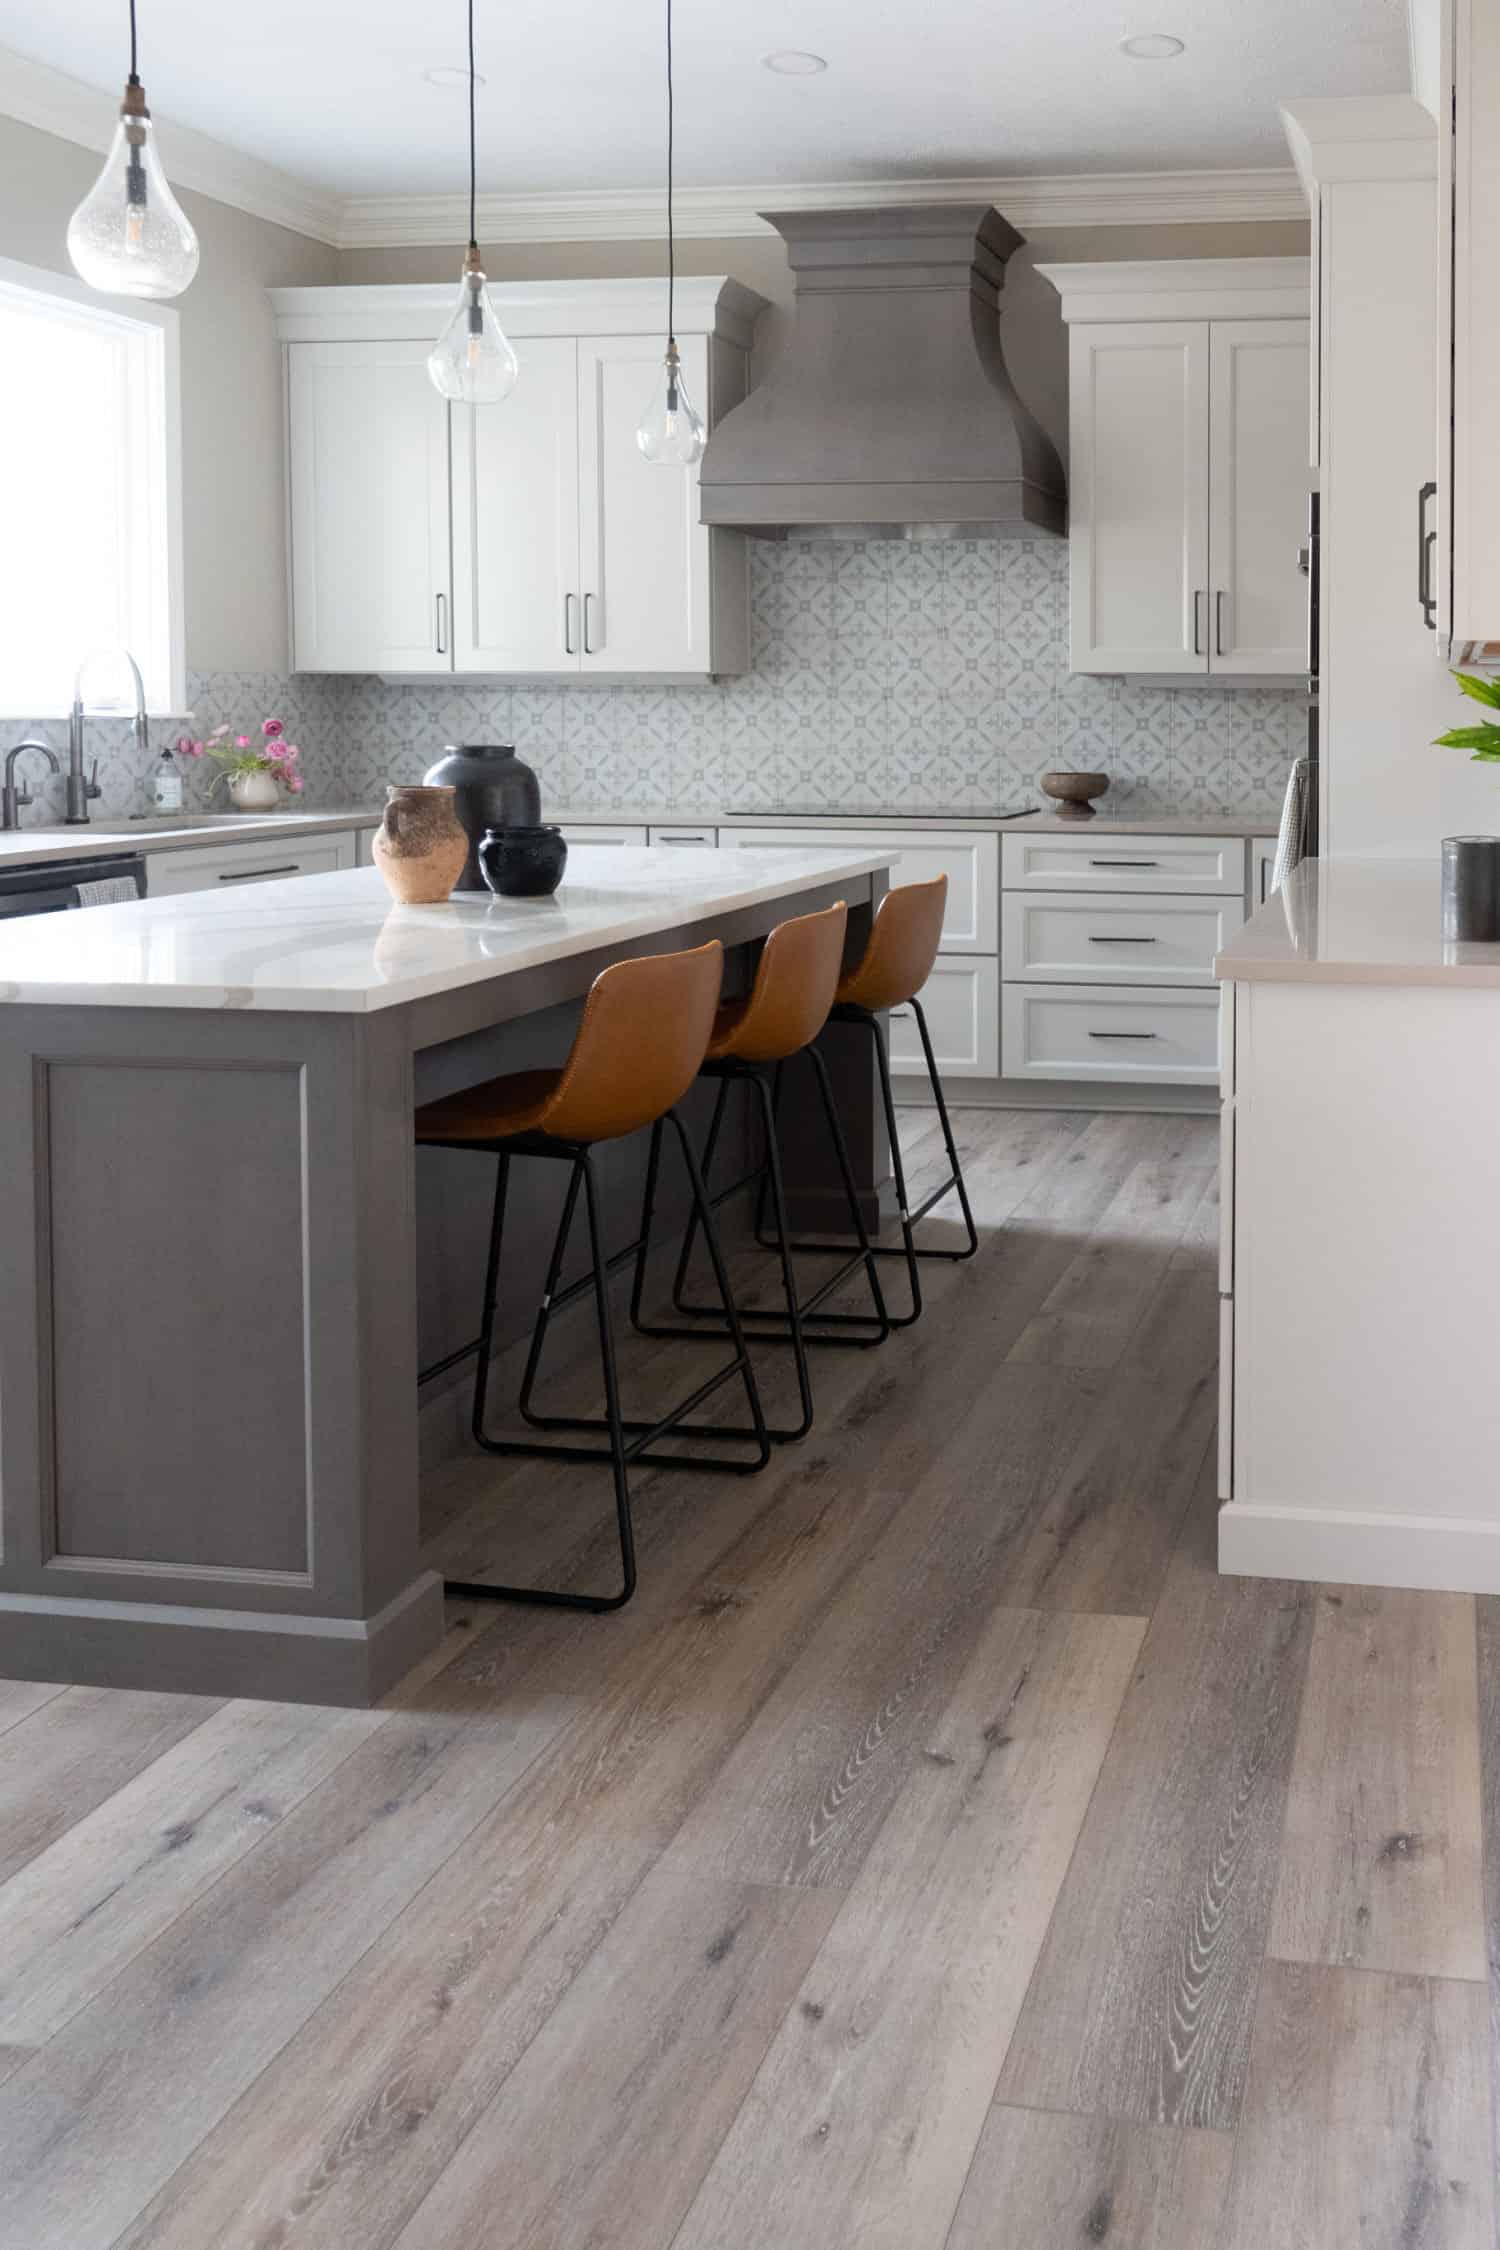 Nicholas Design Build | Remodeling a kitchen with wood floors and a center island.